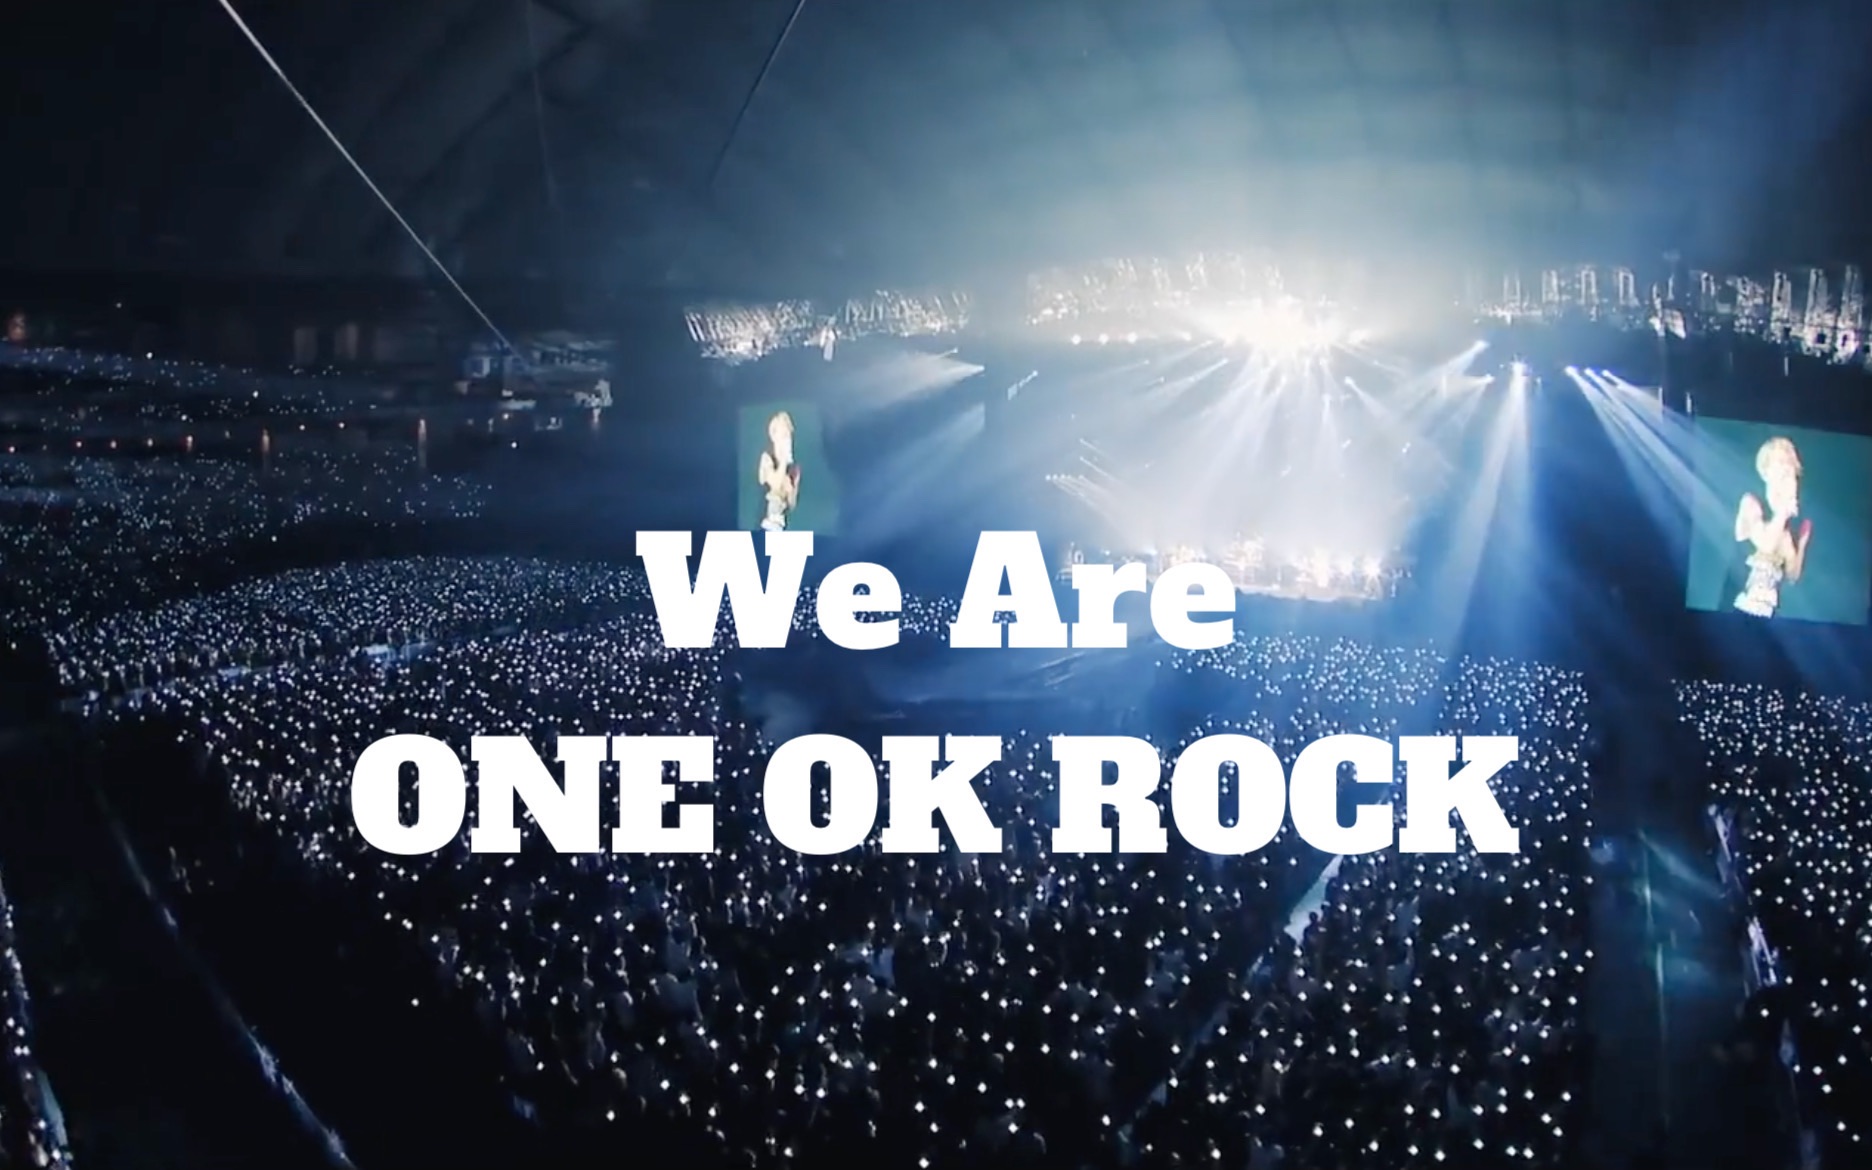 ONE OK ROCK - We are (Official Video from AMBITIONS JAPAN DOME TOUR) 【官方现场】